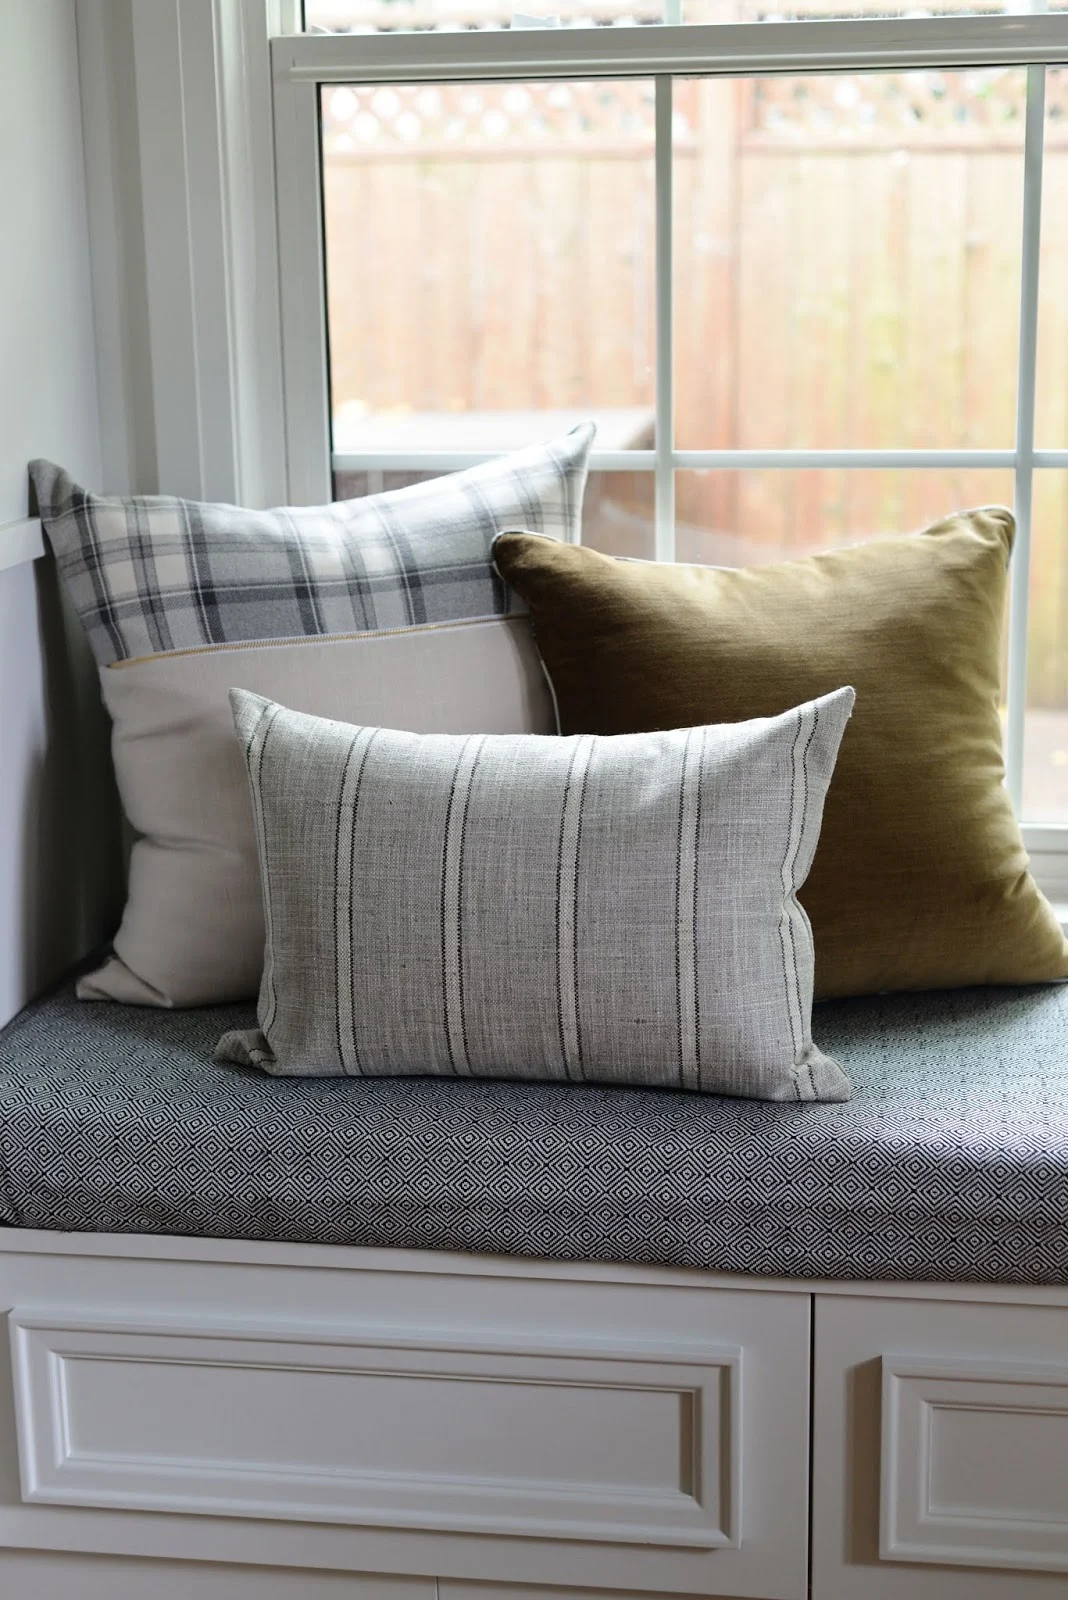 classic plaid and velvet pillows, holiday pillows, heritage holiday home decor